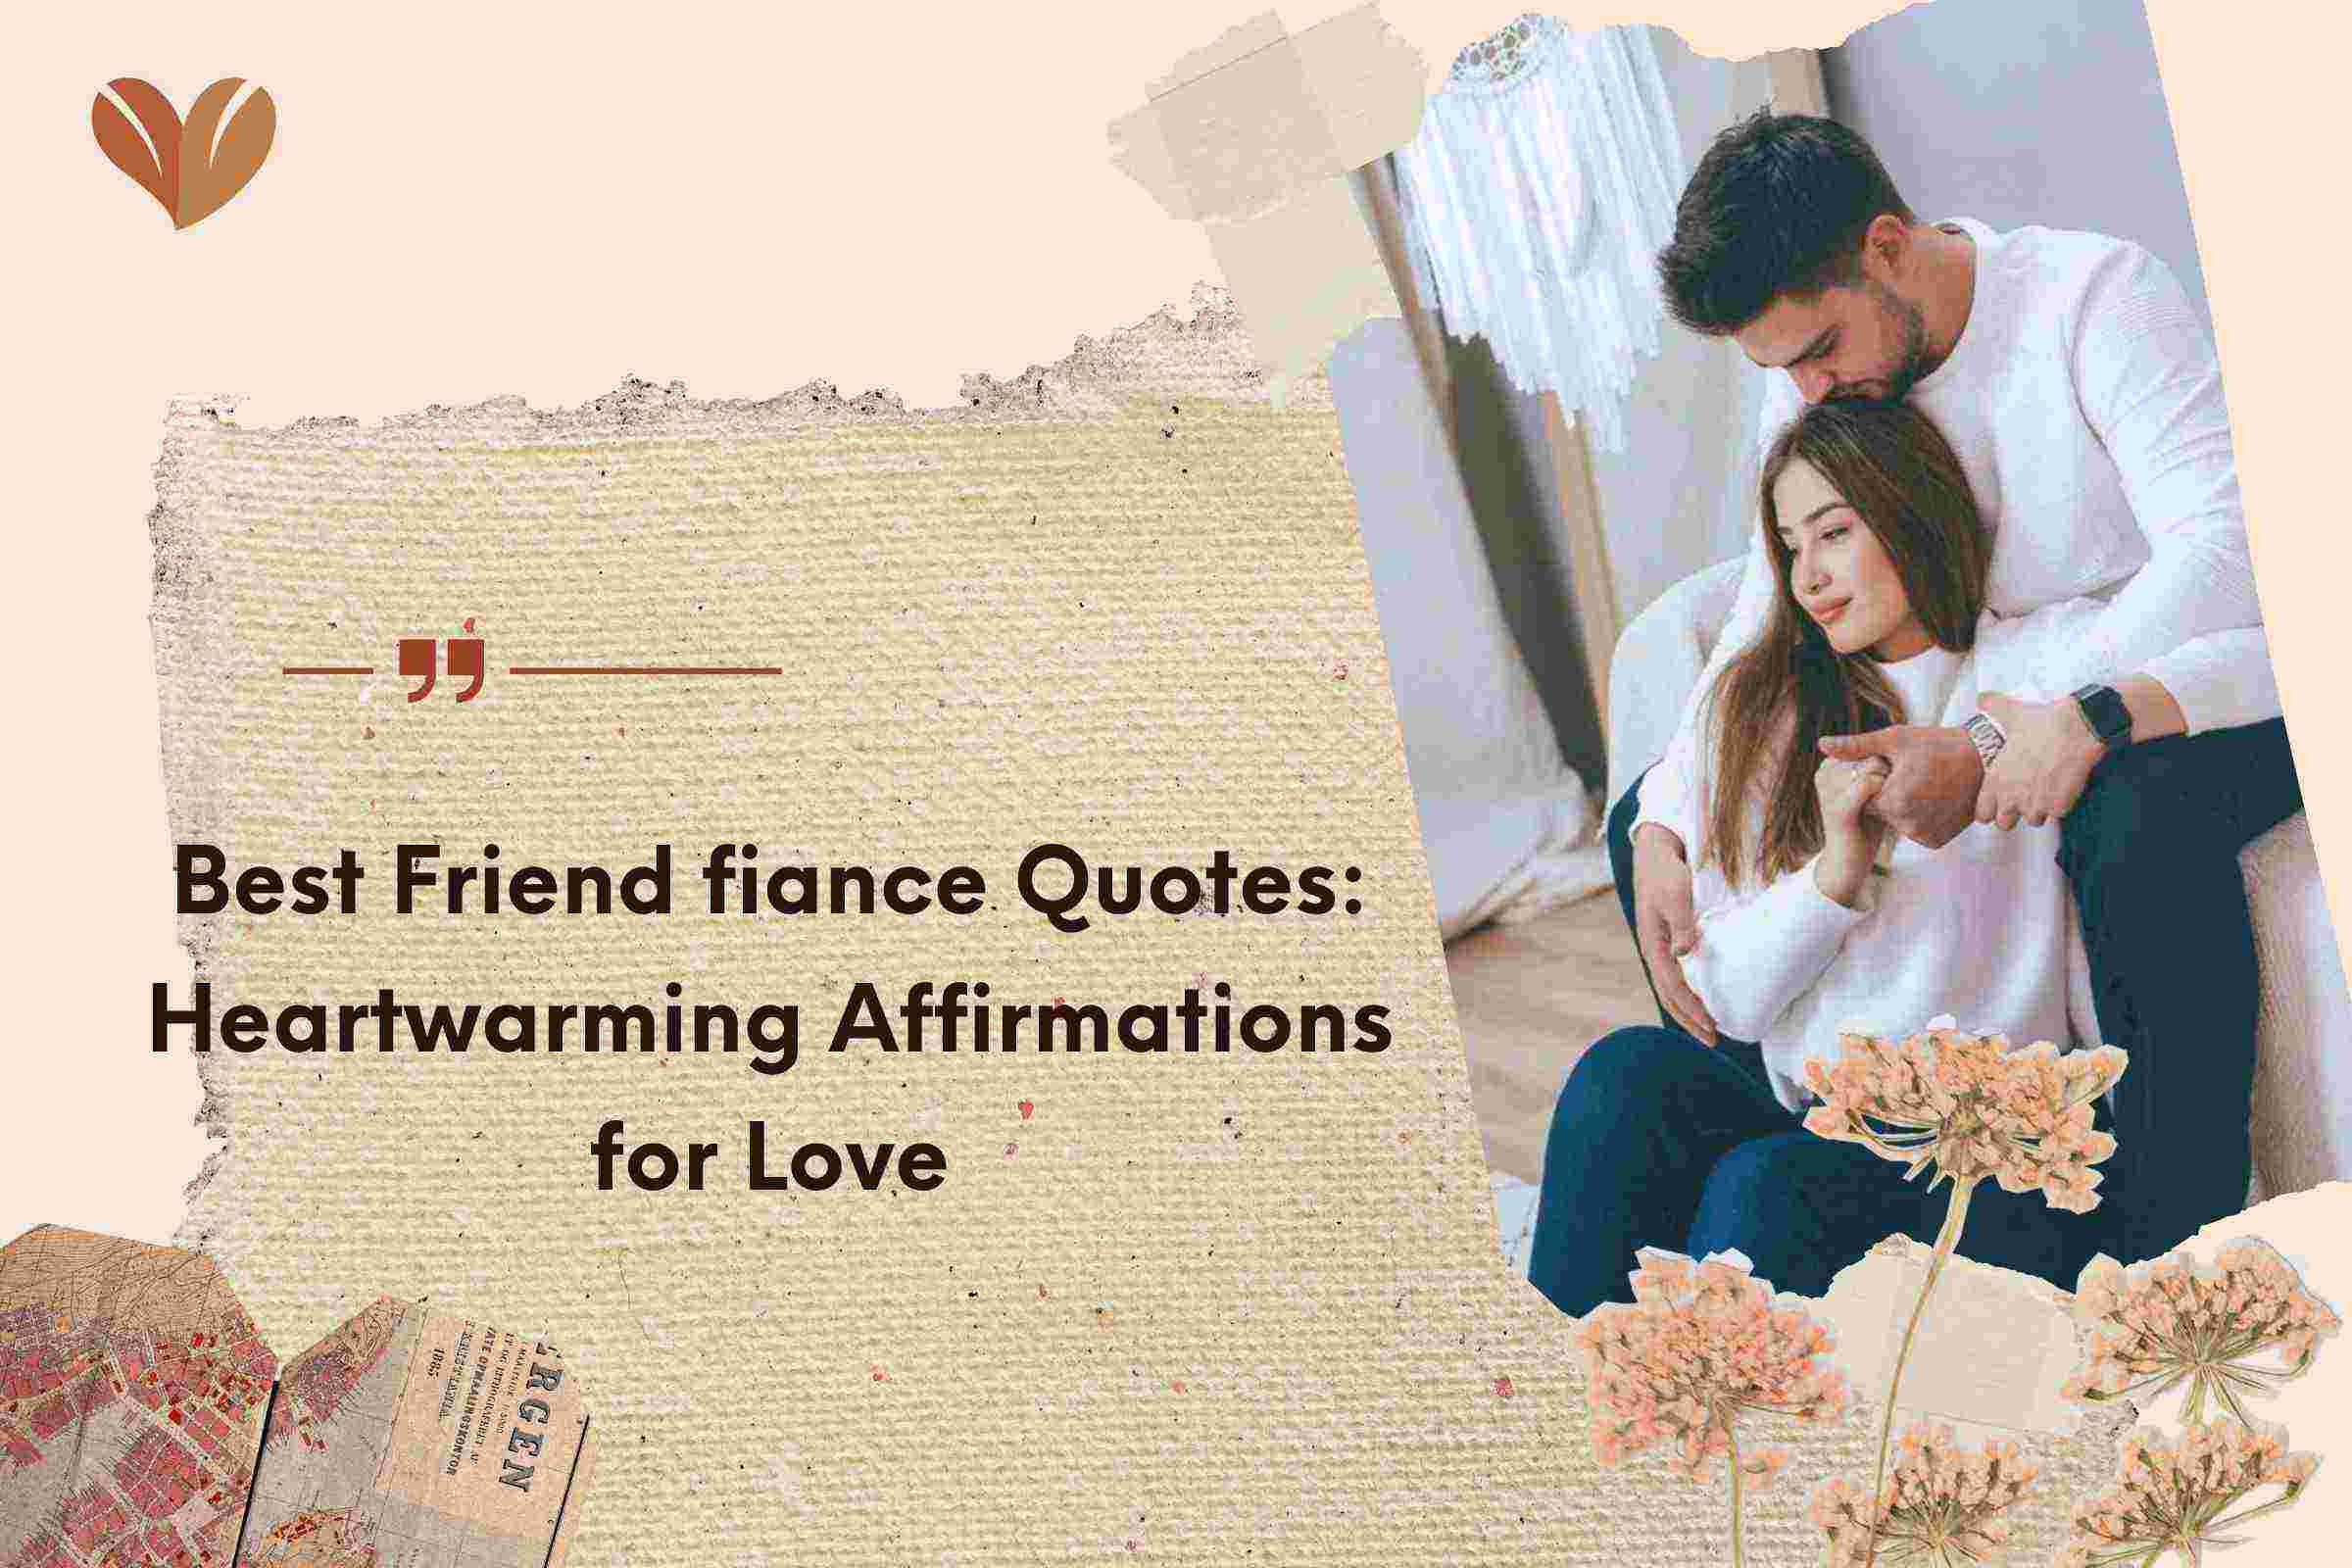 Best Friend fiance Quotes: Heartwarming Affirmations for Love